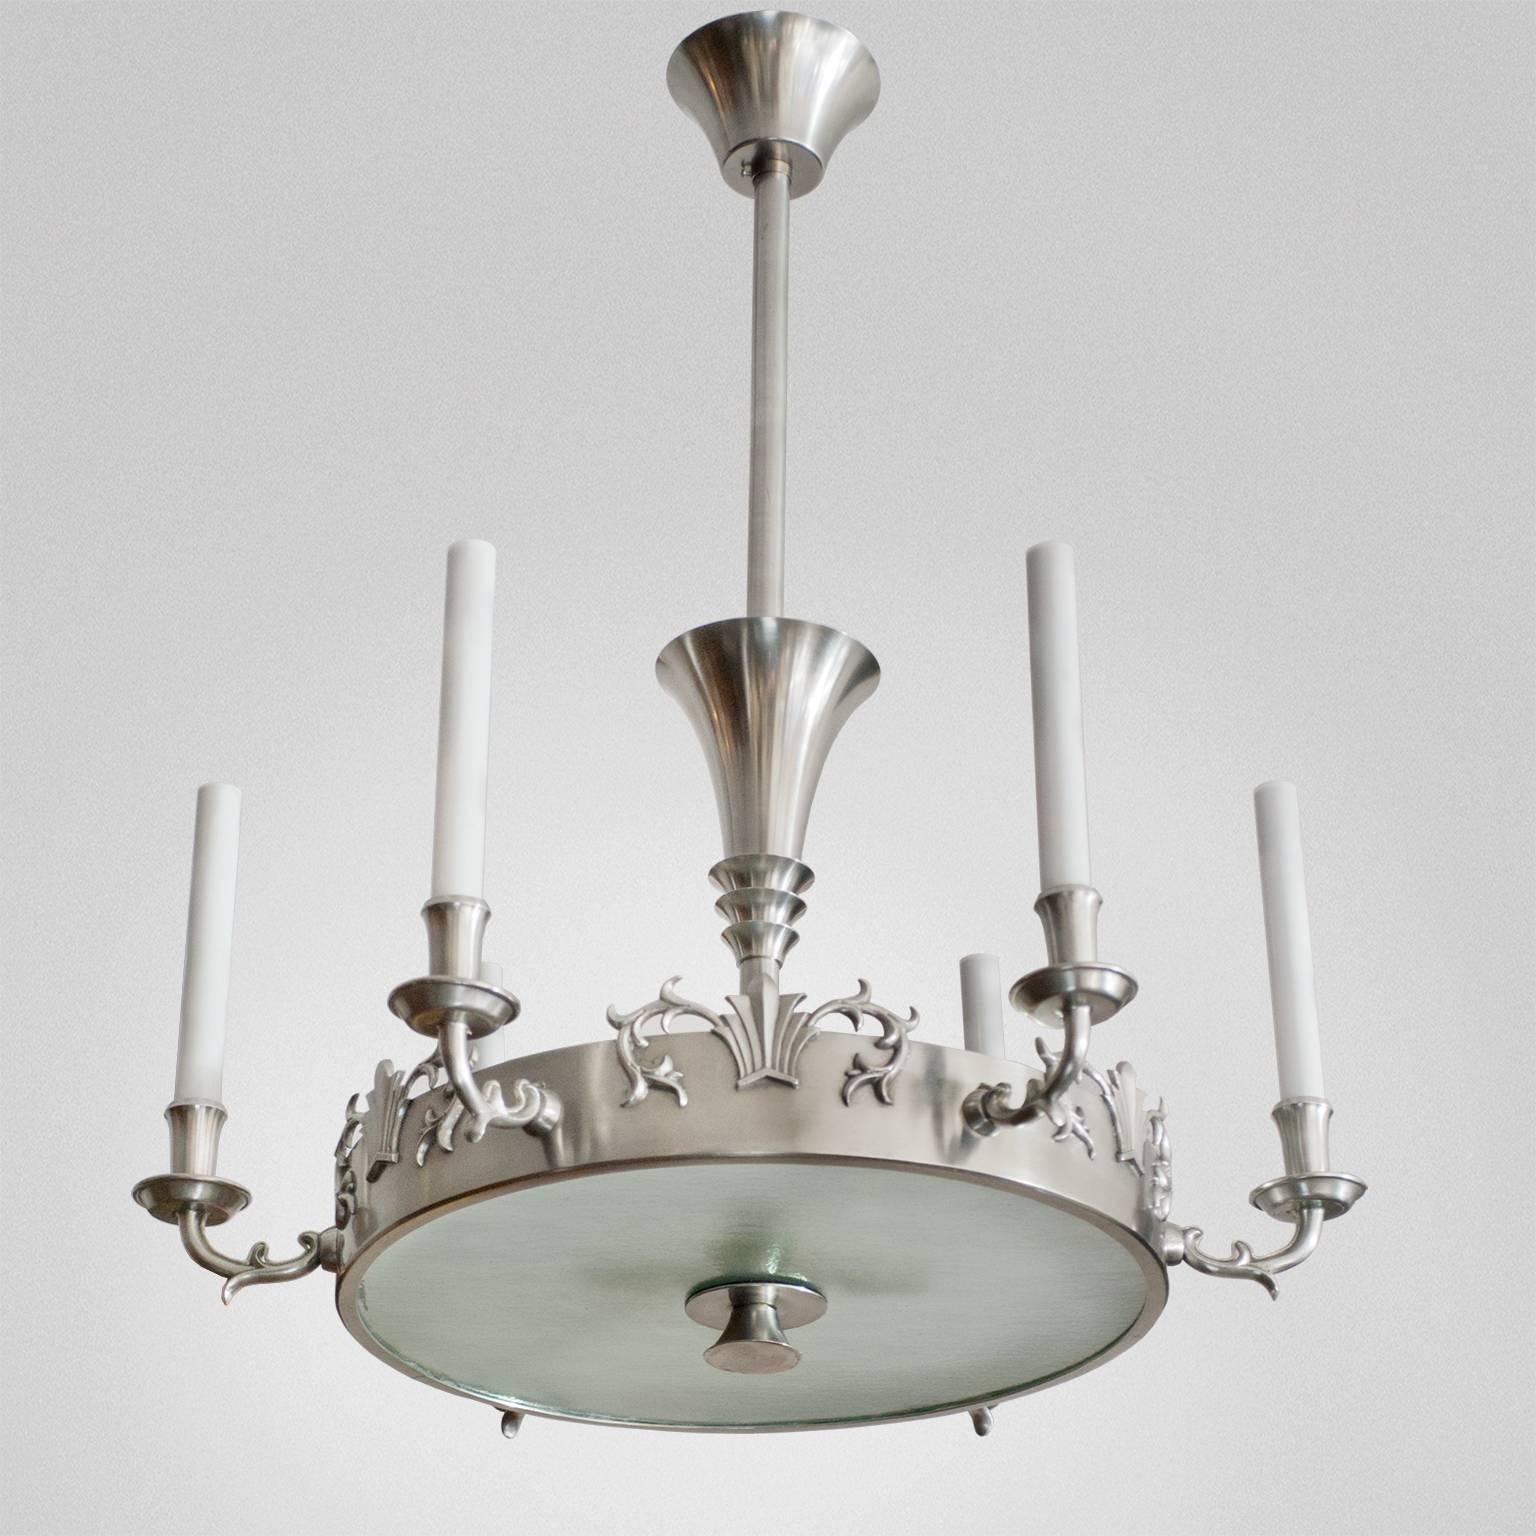 Elegant Swedish Art Deco solid pewter 6-arm chandelier by Carl Tingstrom. Ring form with applied stylized decorations. The center houses 4 standard socket, each arm uses candelabra base sockets. Newly polished, lacquered and rewired, original glass